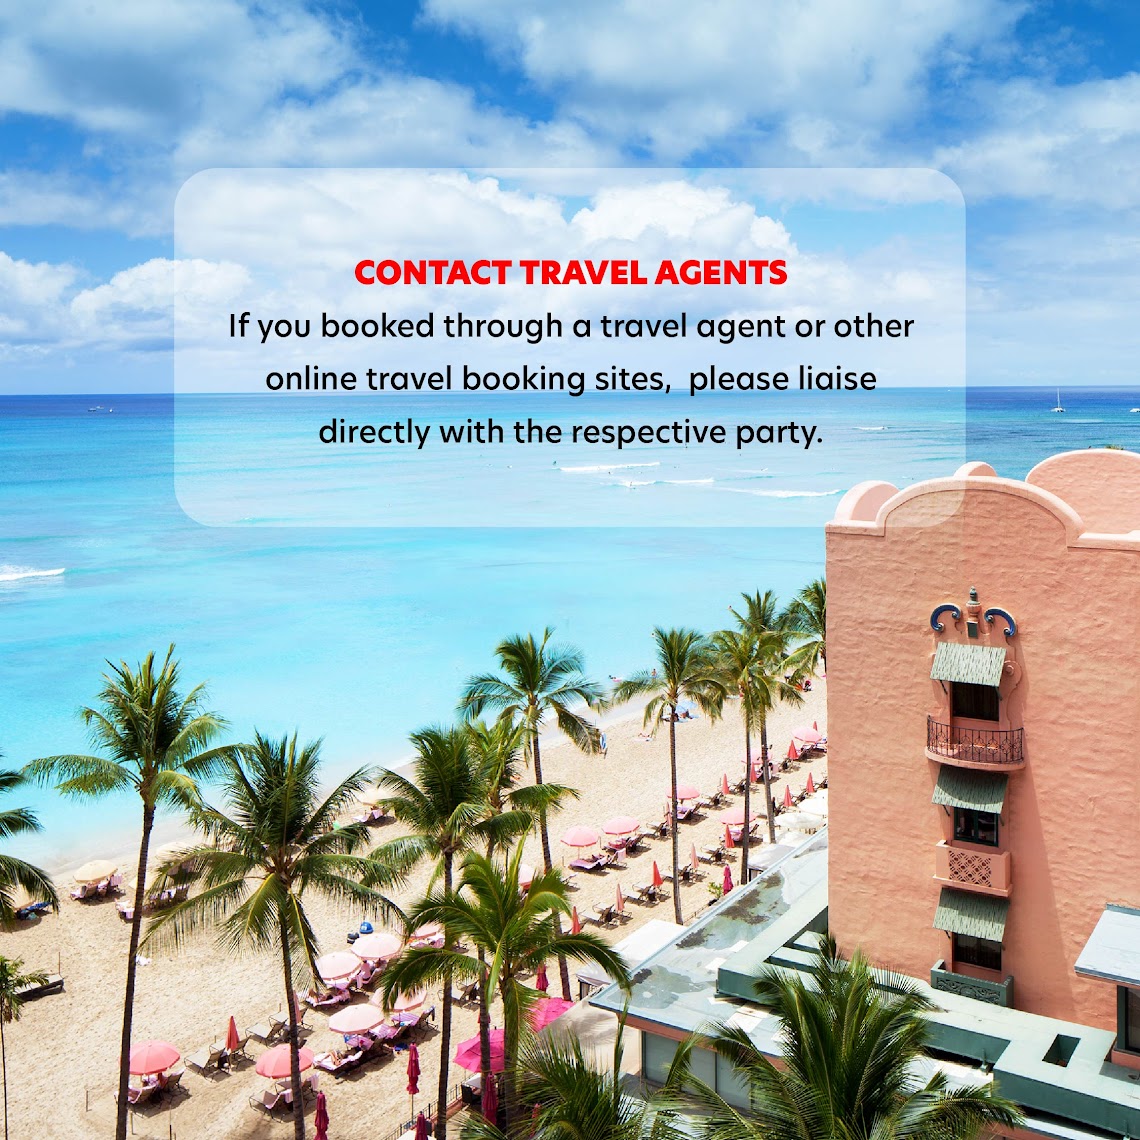 Contact Travel Agents